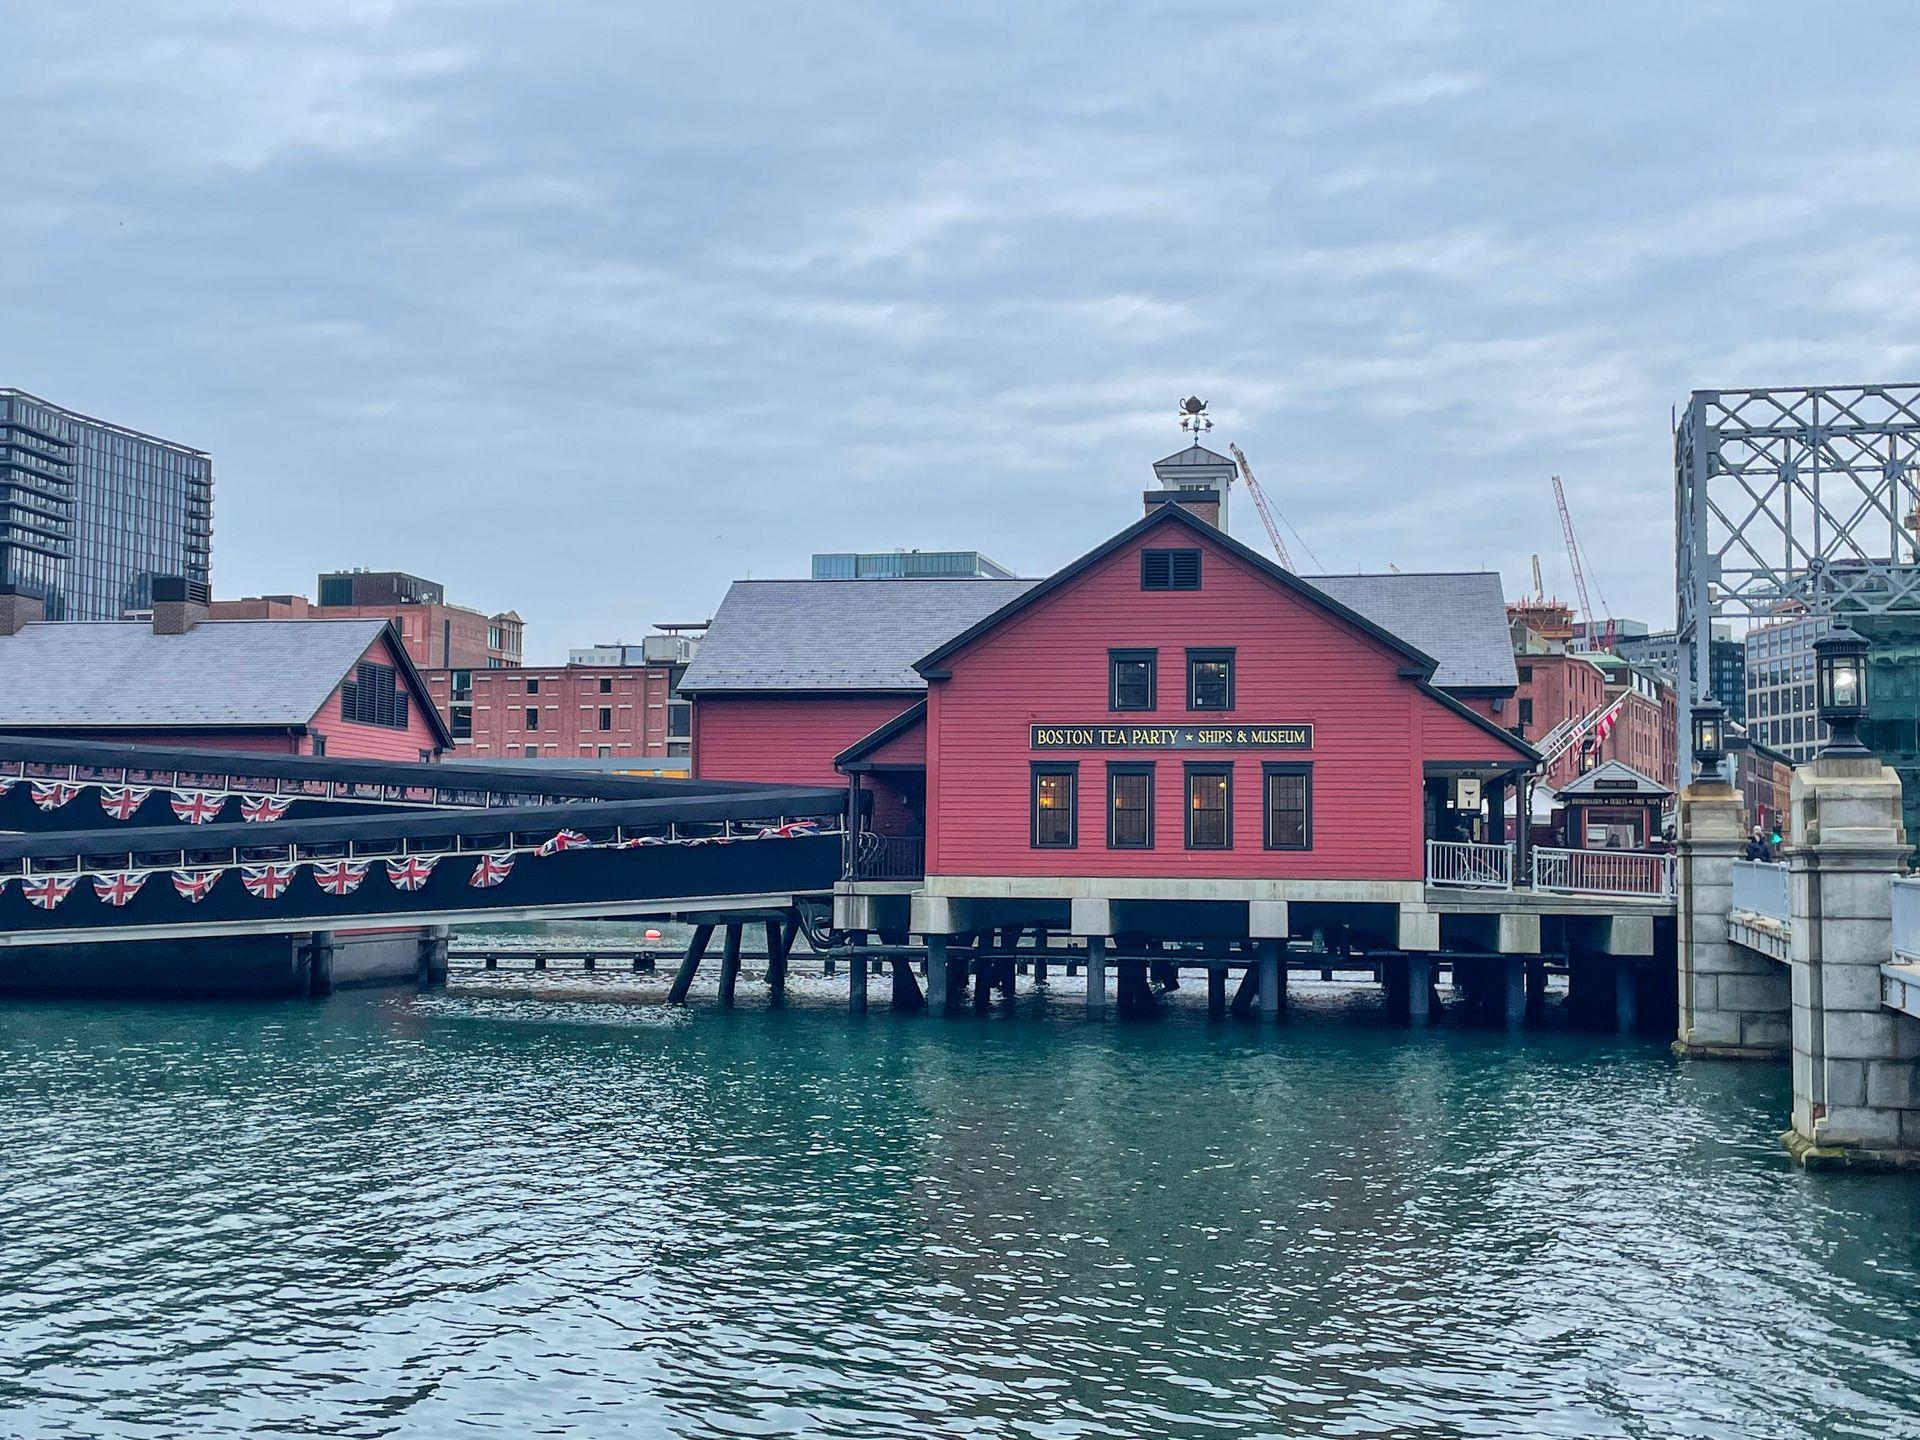 The exterior of the Boston Tea Party Museum, a red building over the water.